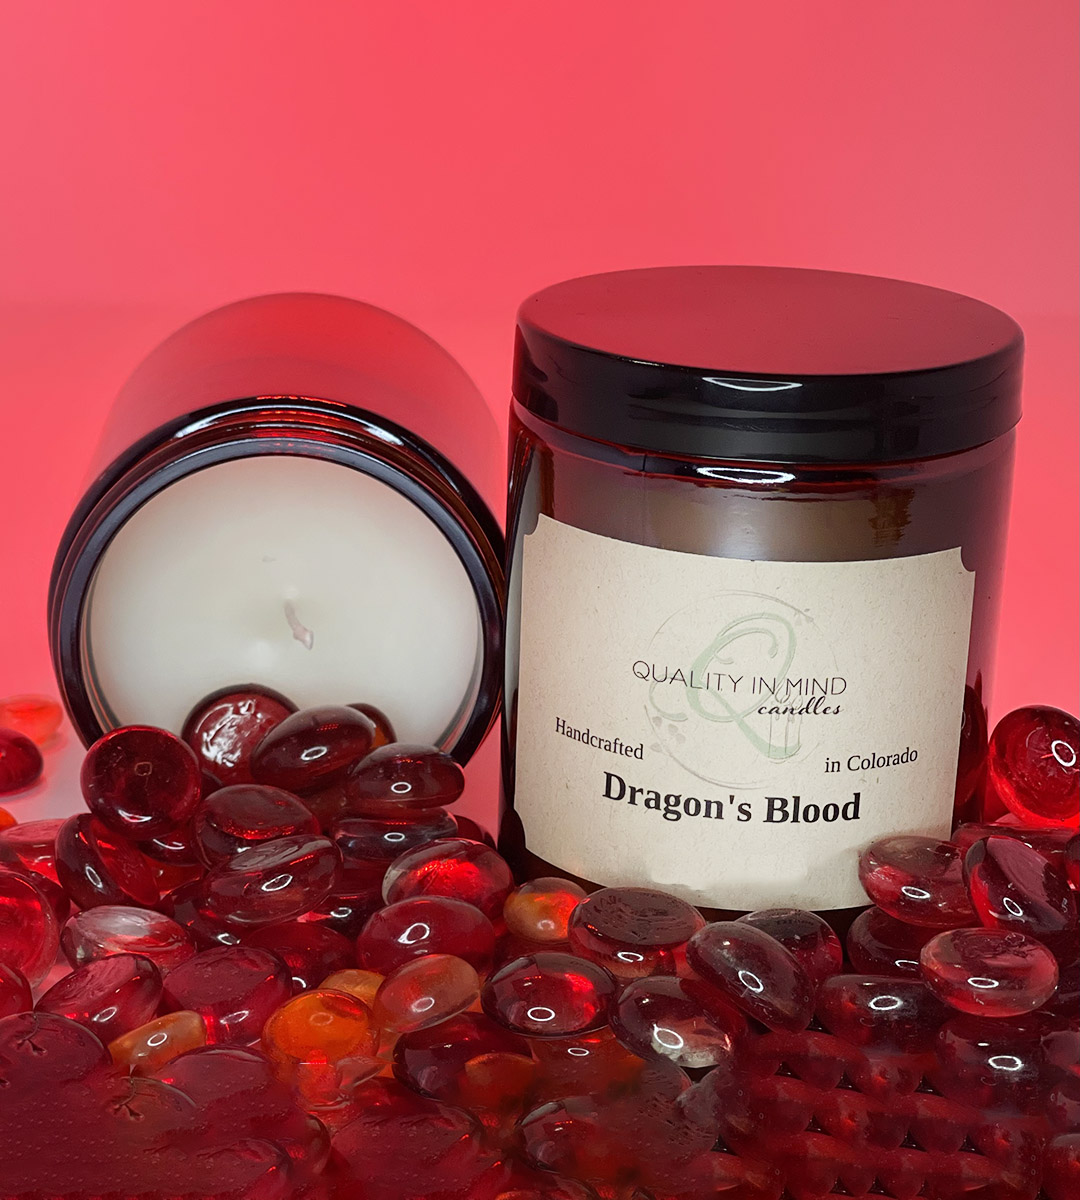 Candle in Dragon's Blood Scent surrounded by red stones